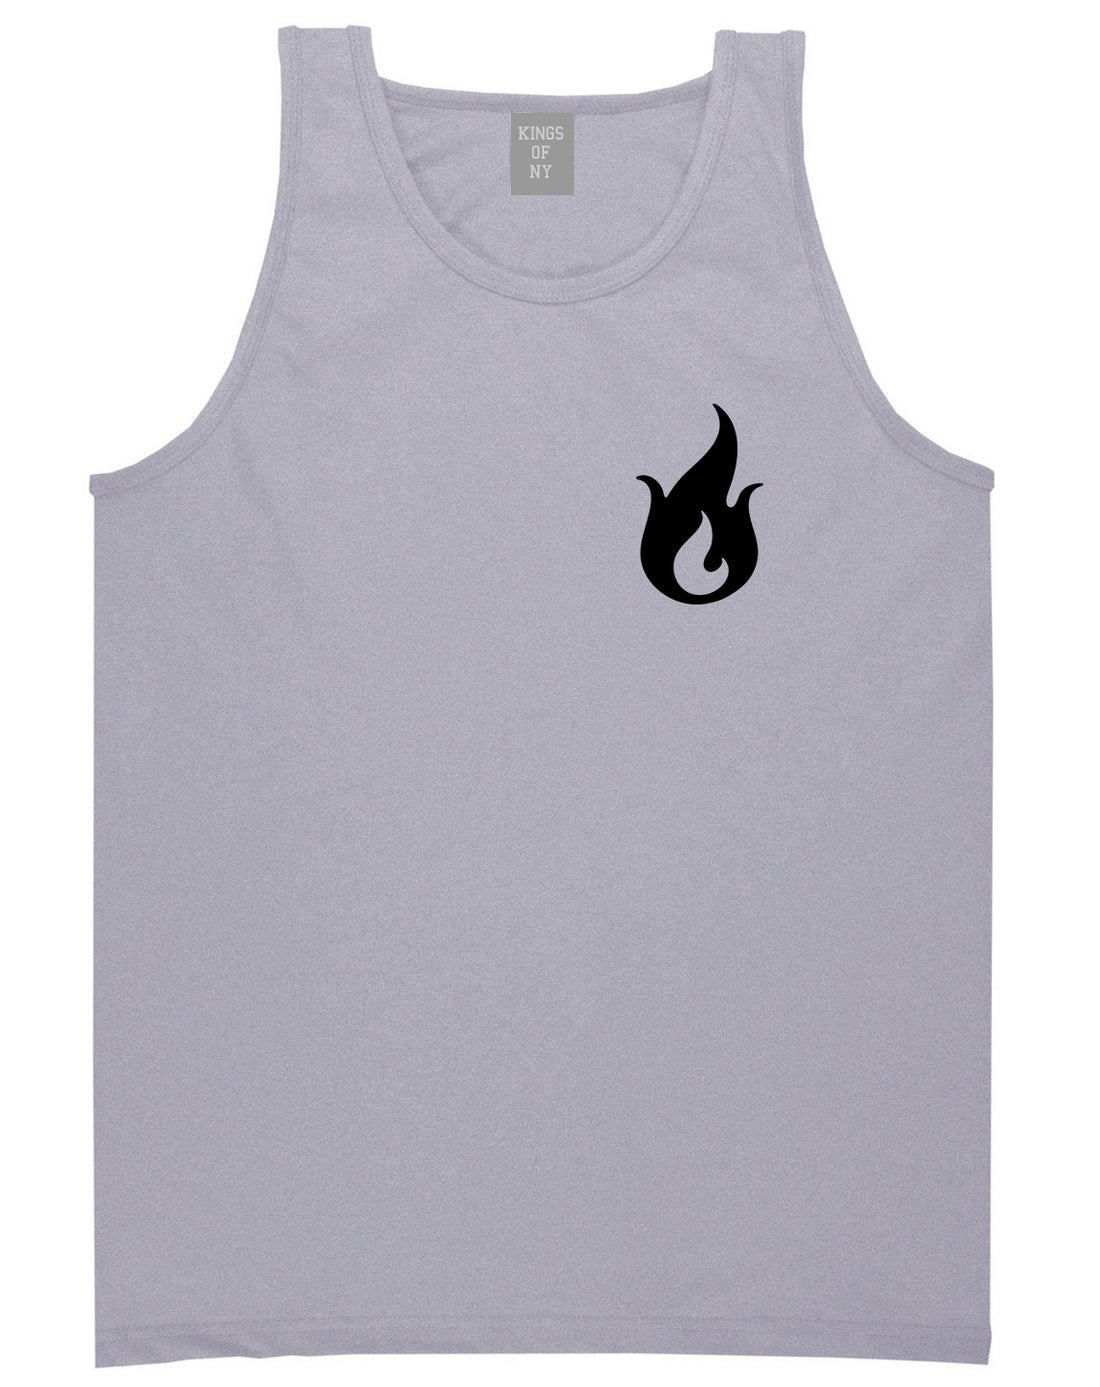 Fire Emoji Chest Mens Grey Tank Top Shirt by KINGS OF NY